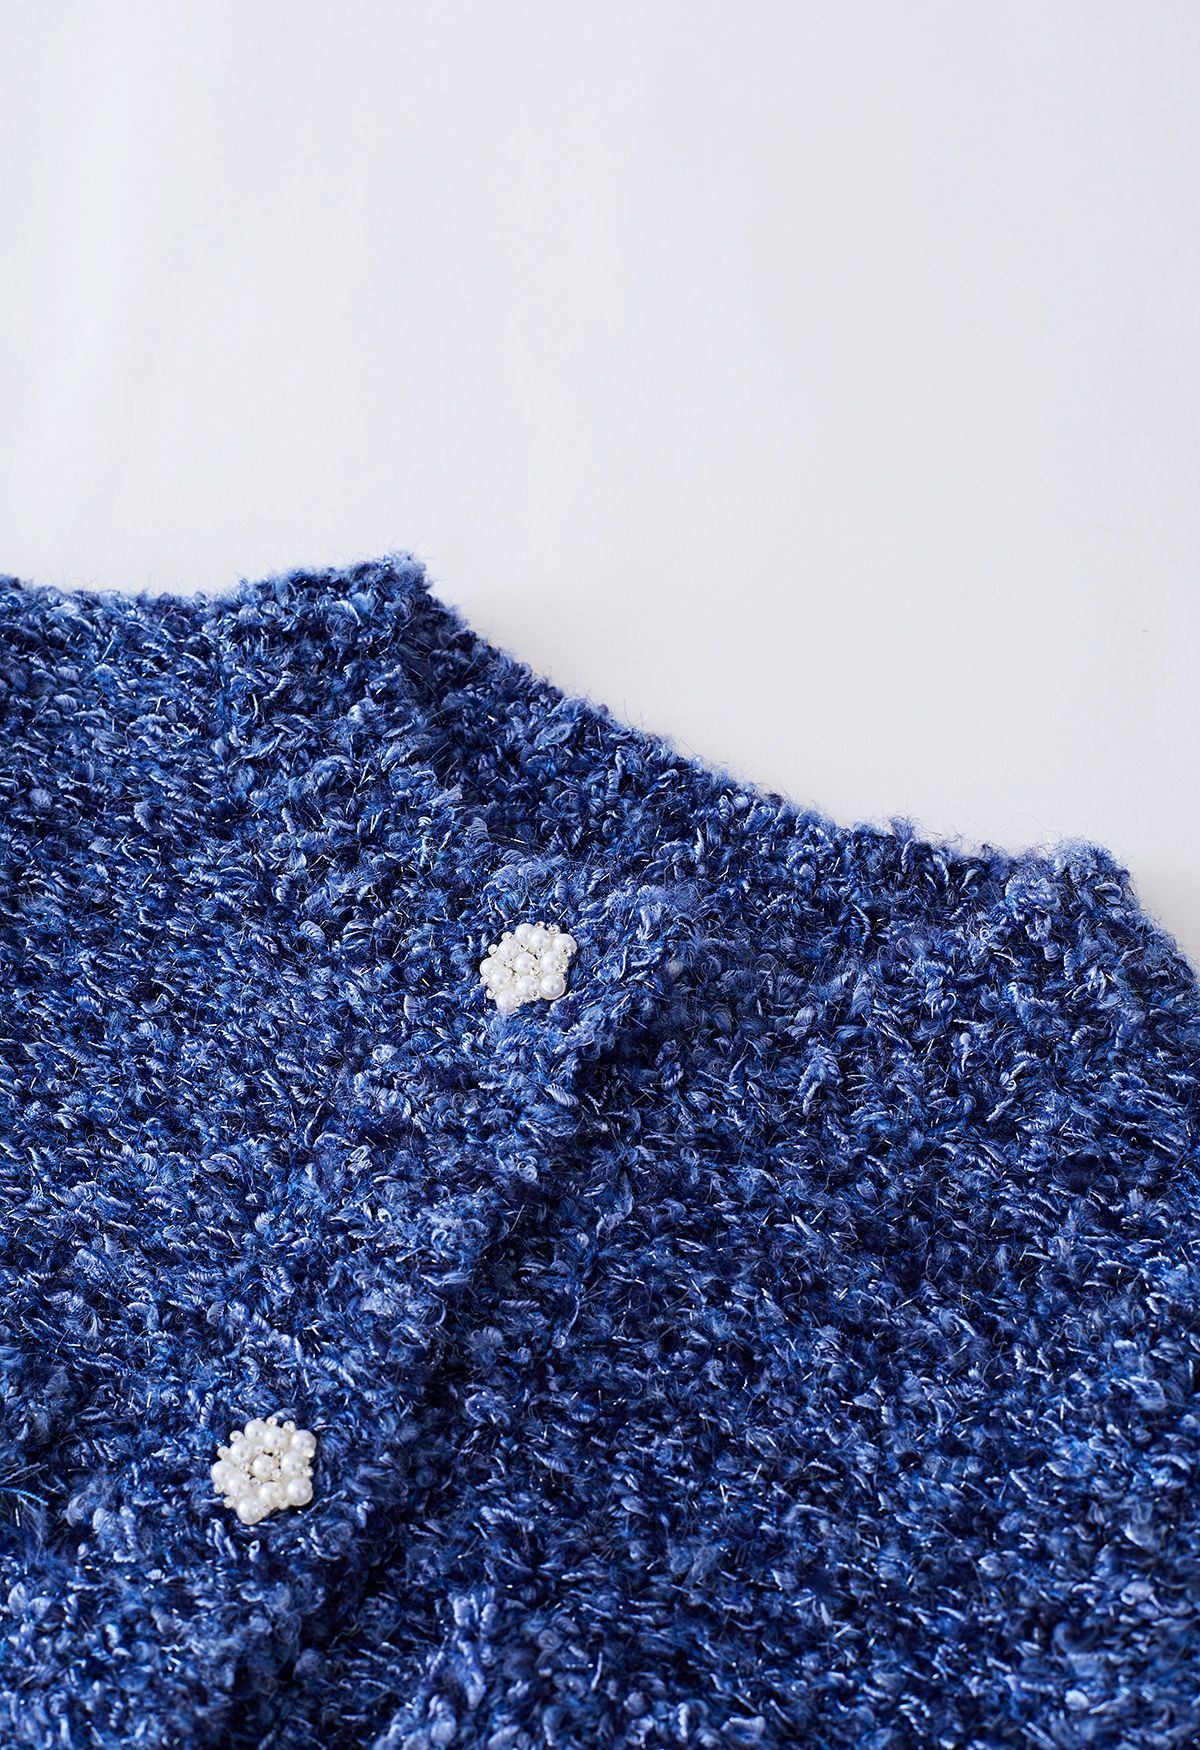 Pearly Button Shimmer Fuzzy Crop Cardigan in Blue - Retro, Indie and ...